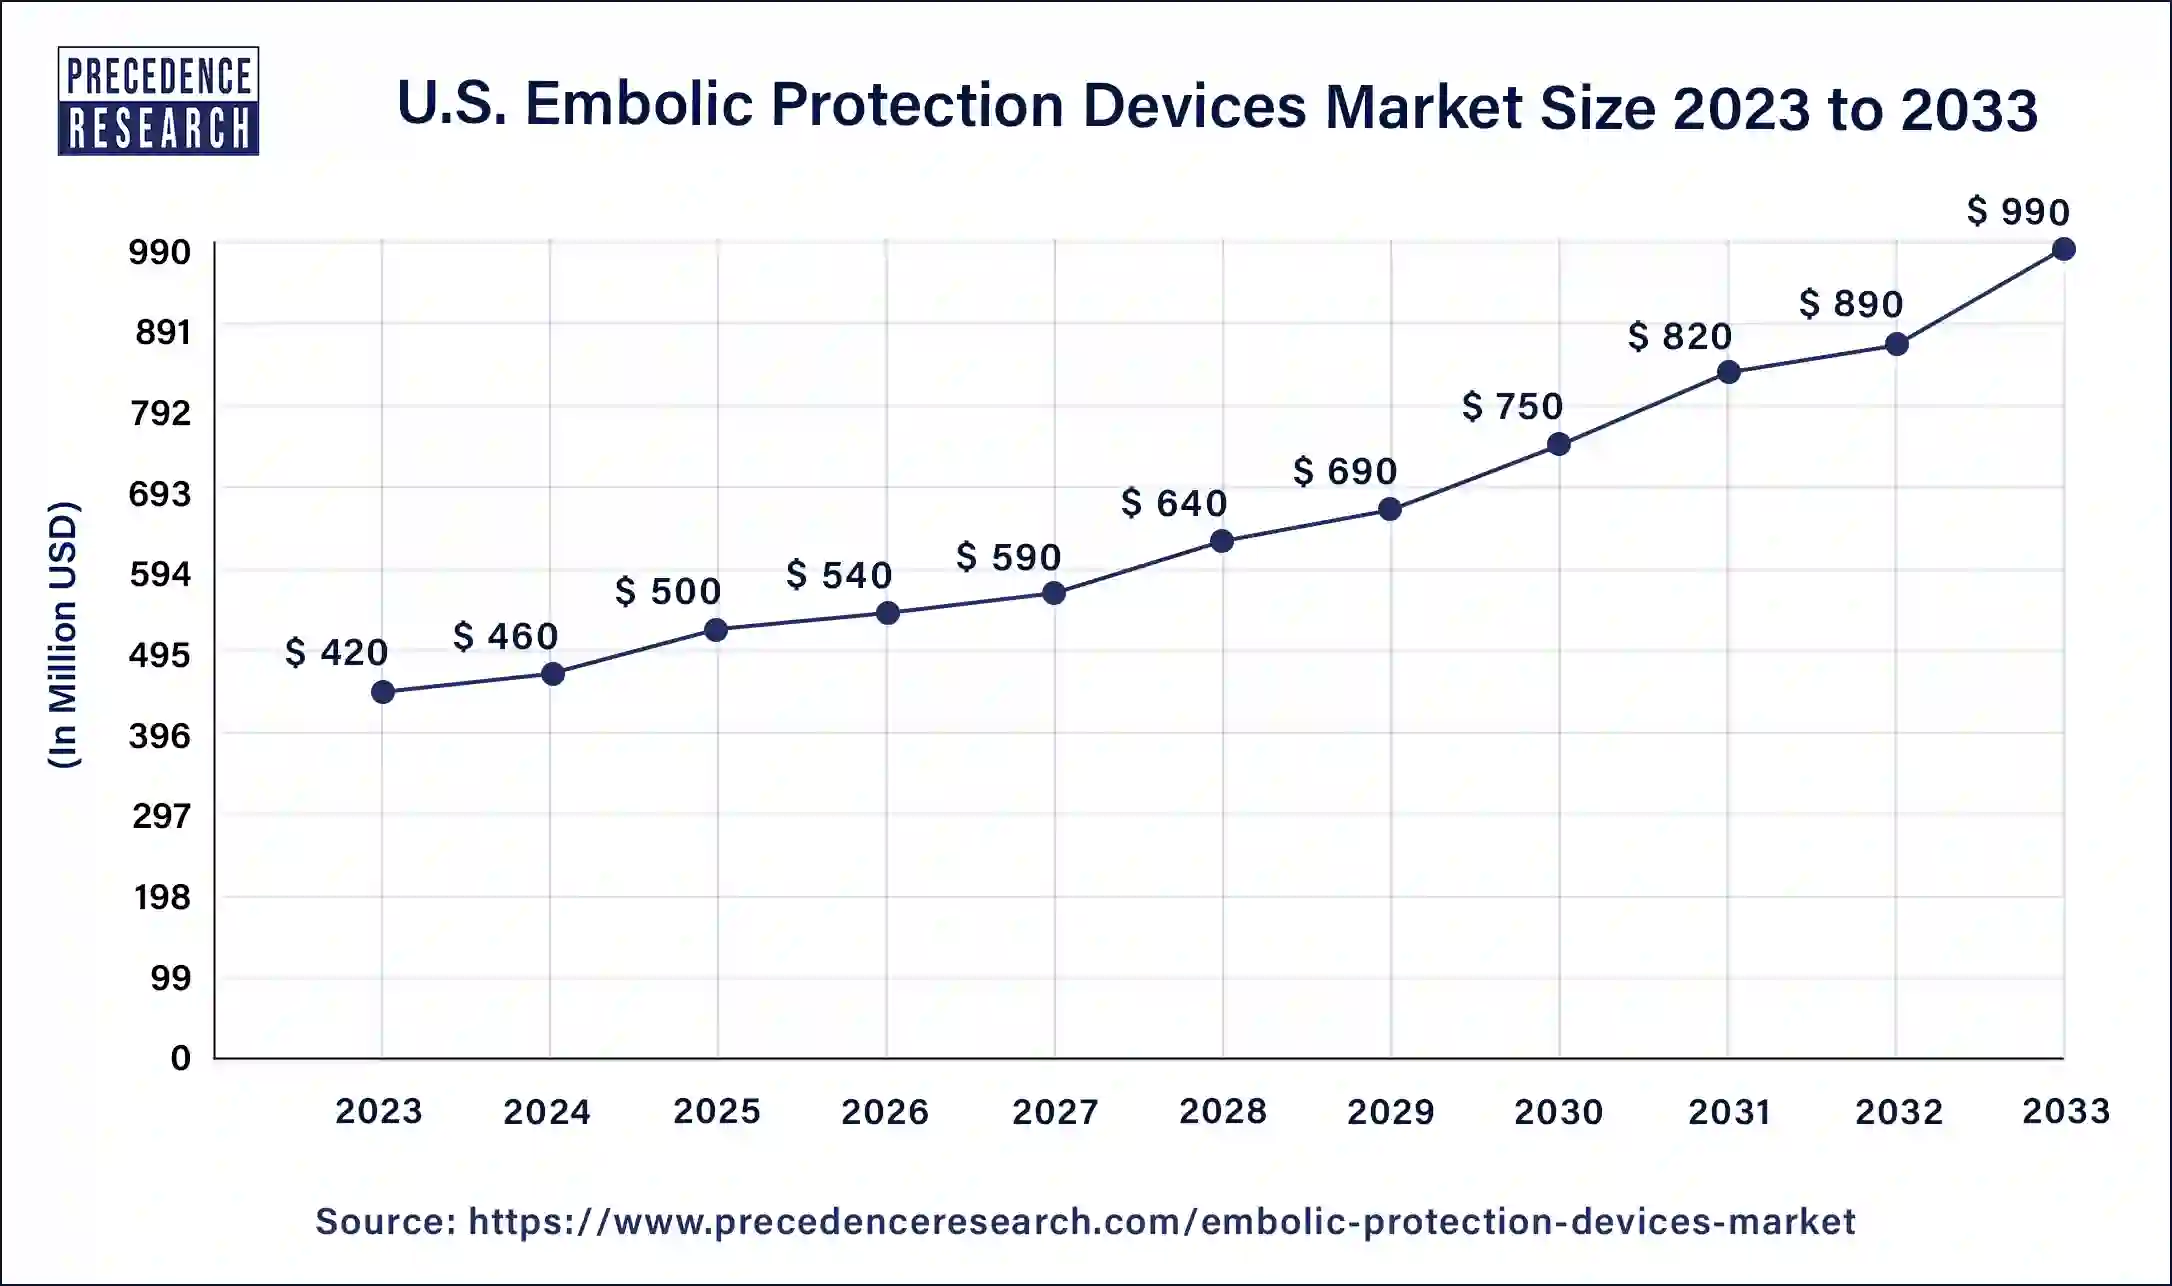 U.S. Embolic Protection Devices Market Size 2024 to 2033